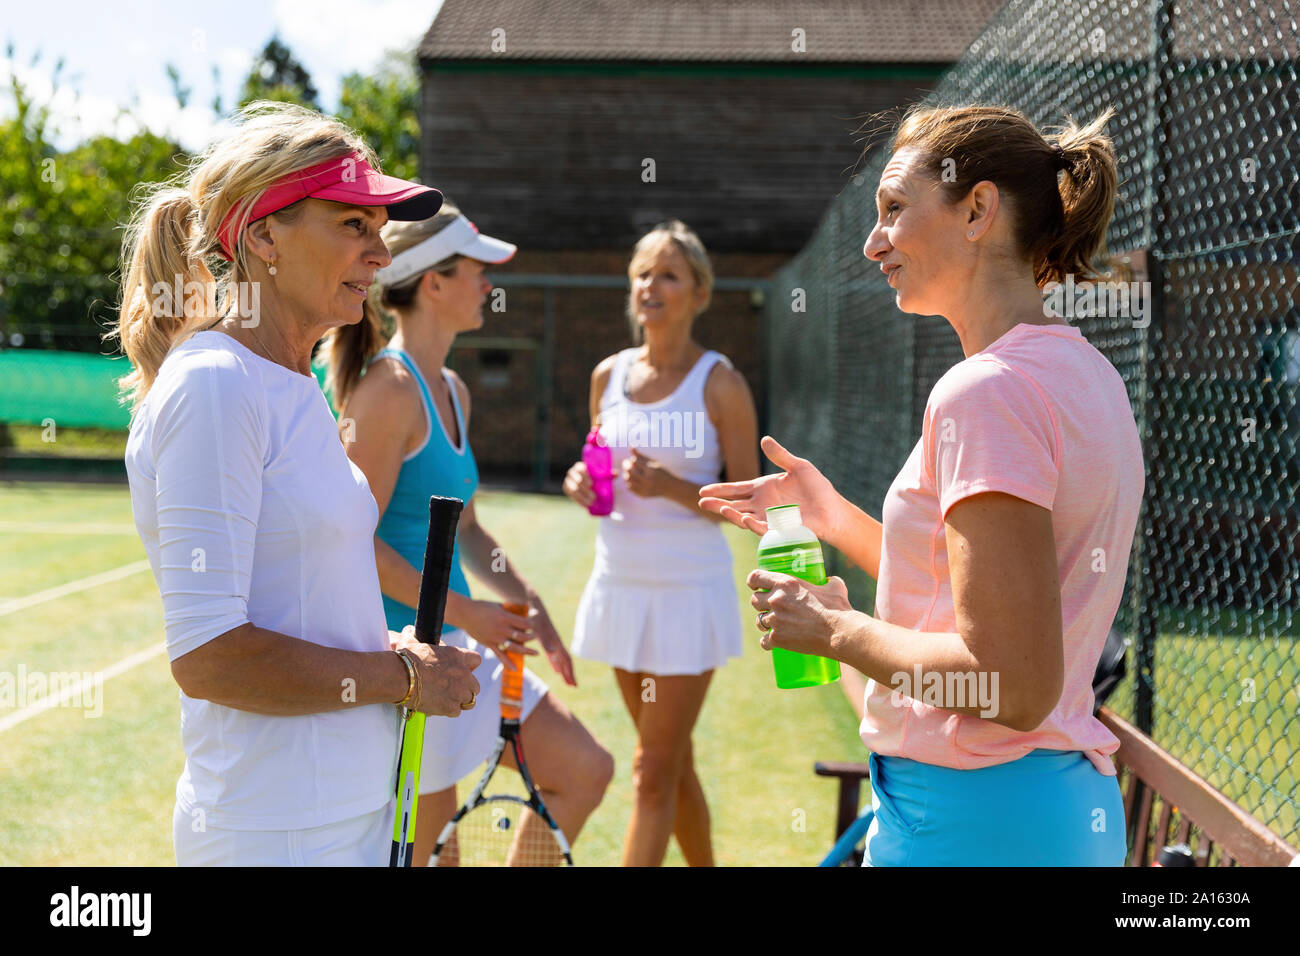 Mature women at tennis club taking a break from playing Stock Photo